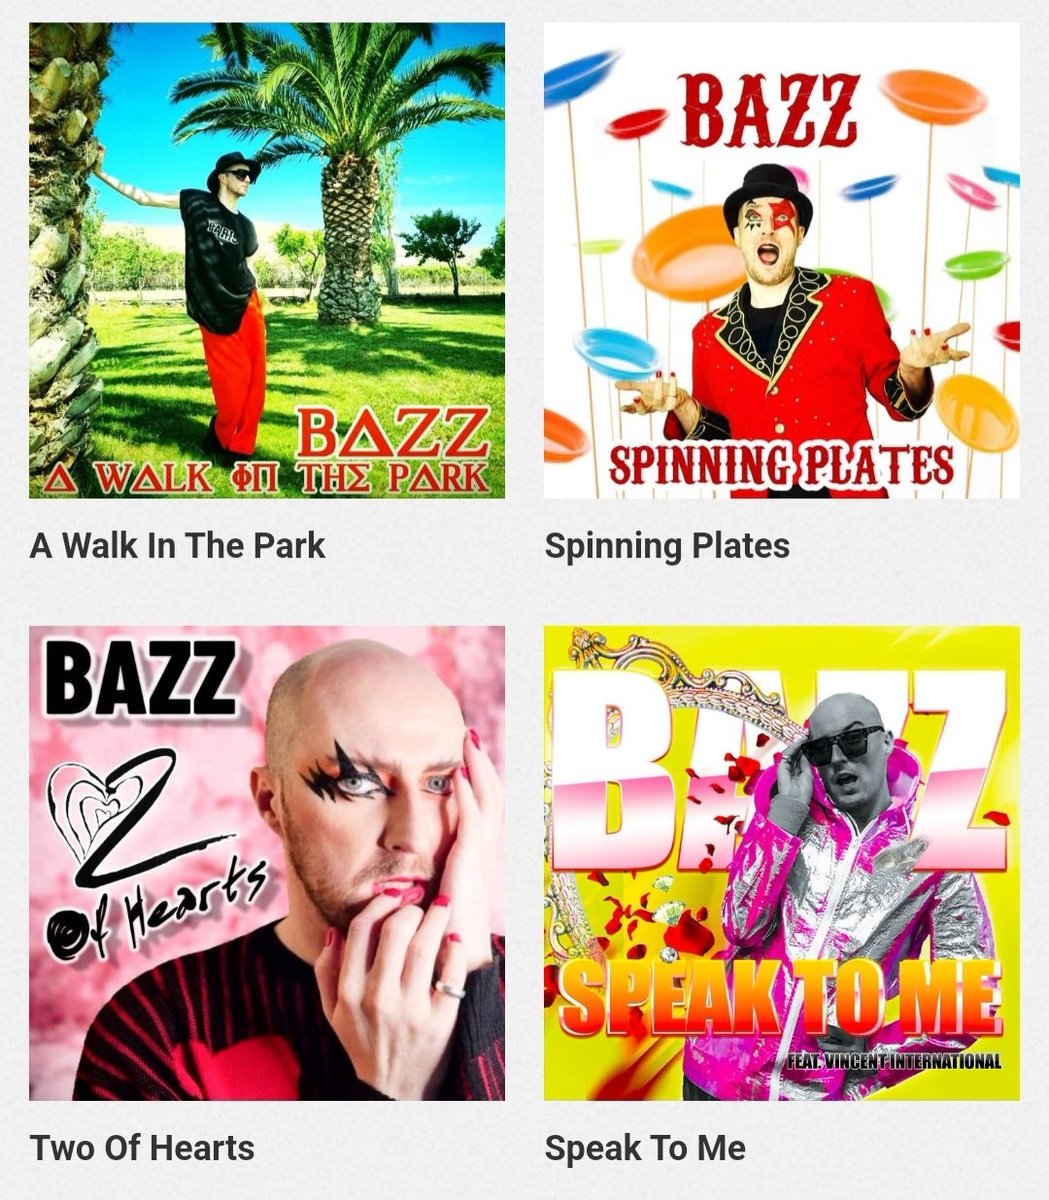 Which is your fave?!! 🤷‍♂️🪩🎶🎧💿🌈🎤🏳️‍🌈

#AWalkInThePark 🌴
#SpinningPlates 🤡
#TwoOfHearts 💞
#SpeakToMe 👄

#Music #ProjectK #VincentInternational #MaxiMusicRecords #BazzEnergy #Releases #Singles #JuanMartinez #Europop #Eurohouse #EuroDisco #Disco #BAZZ #PopMusic #MusicLover